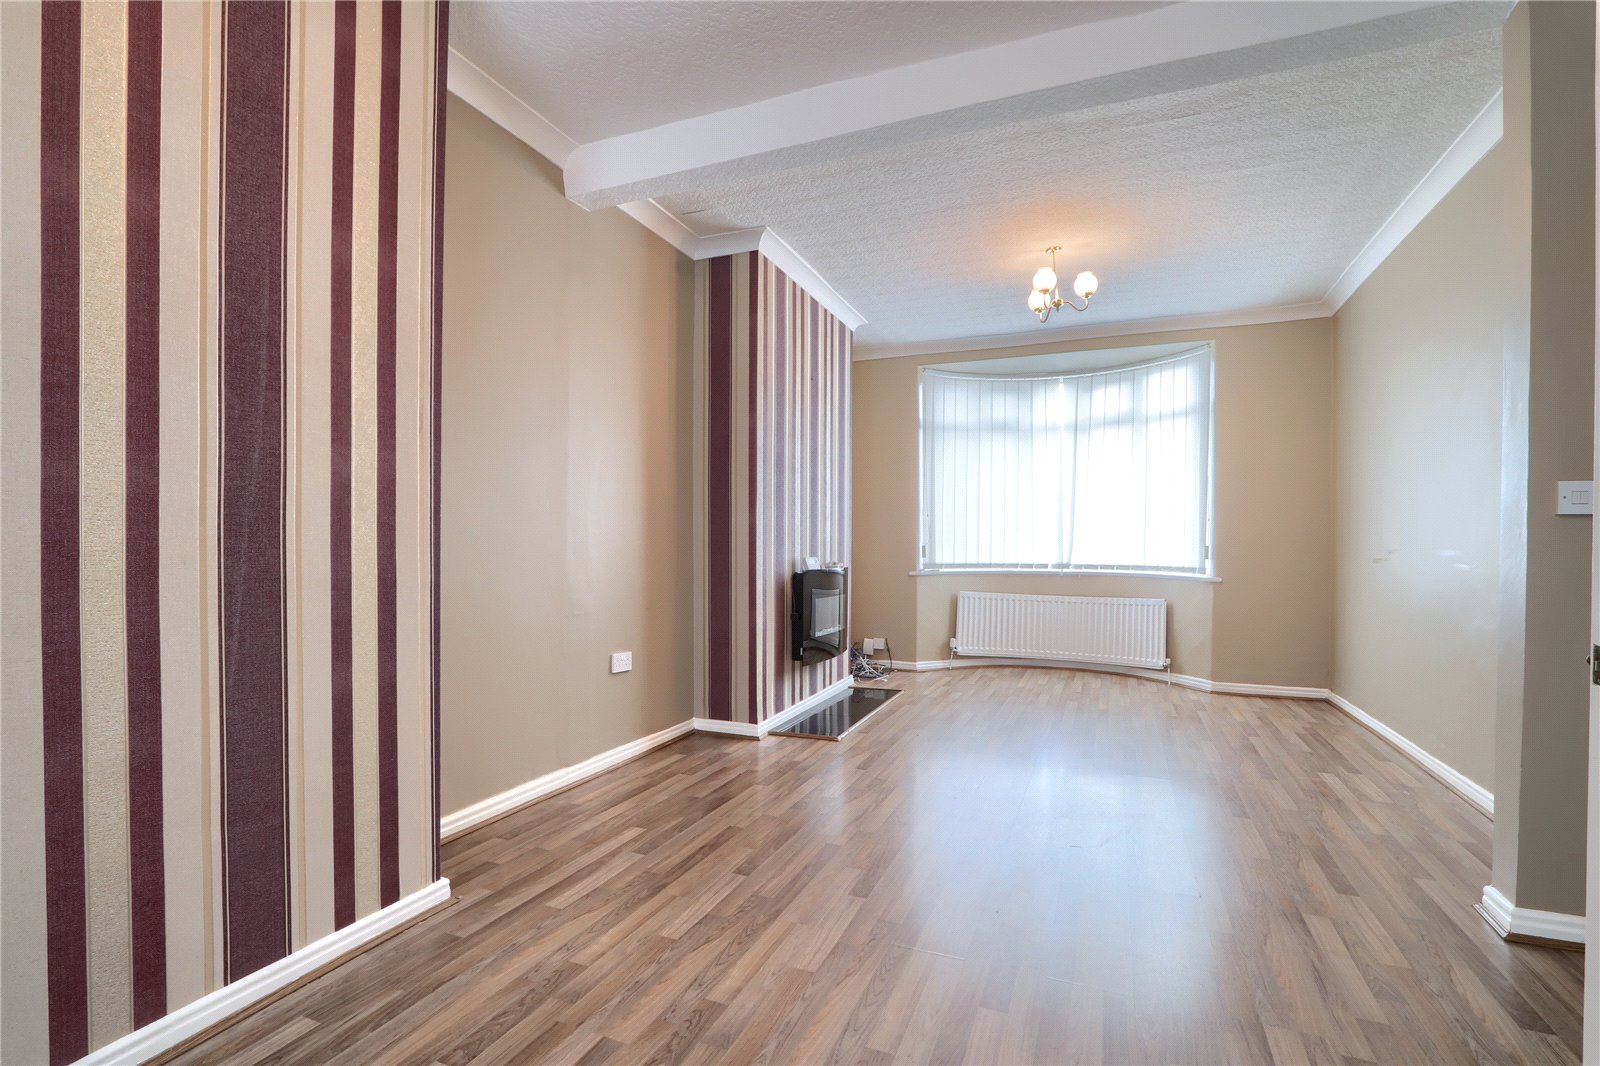 3 bed house for sale in Richardson Road, Stockton-on-Tees  - Property Image 3